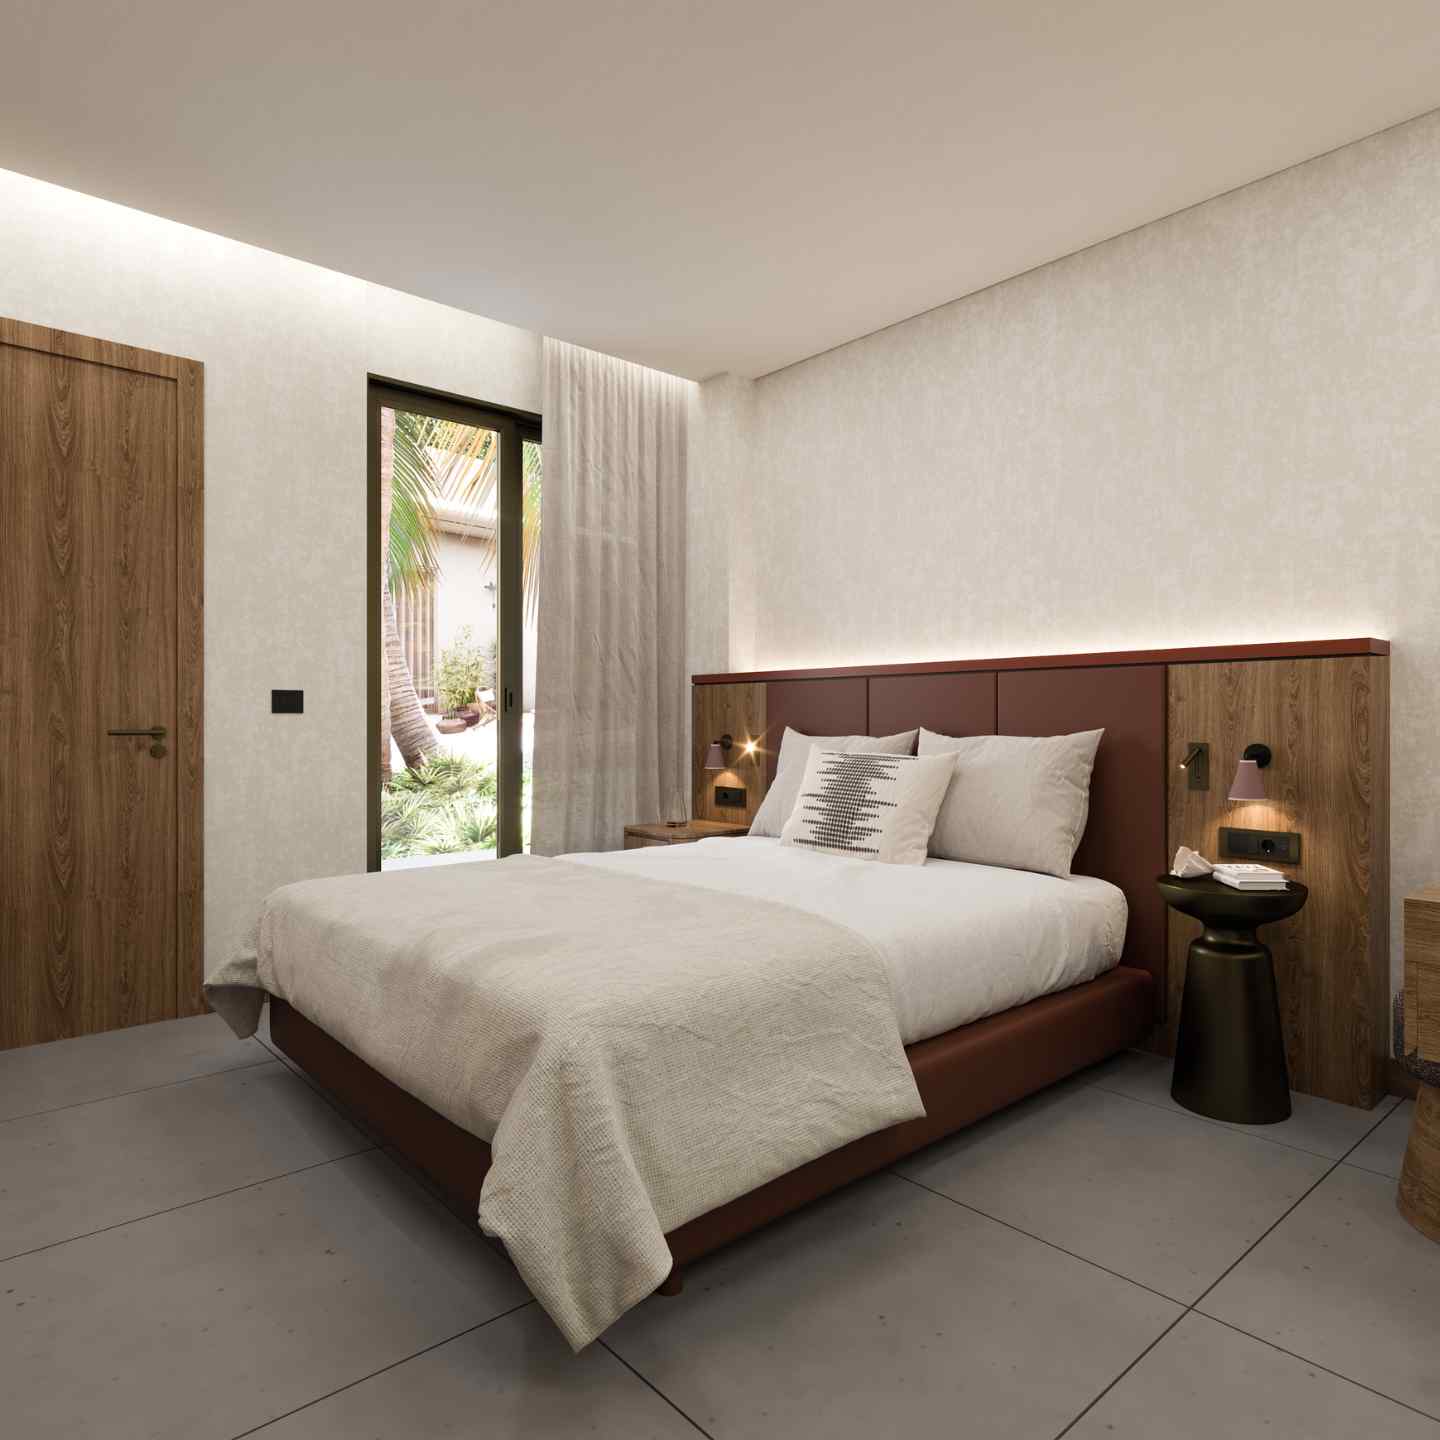 Angle of large bed with beige bedding and wooden bed frame, small dark bedside table, and sliding balcony door in the background